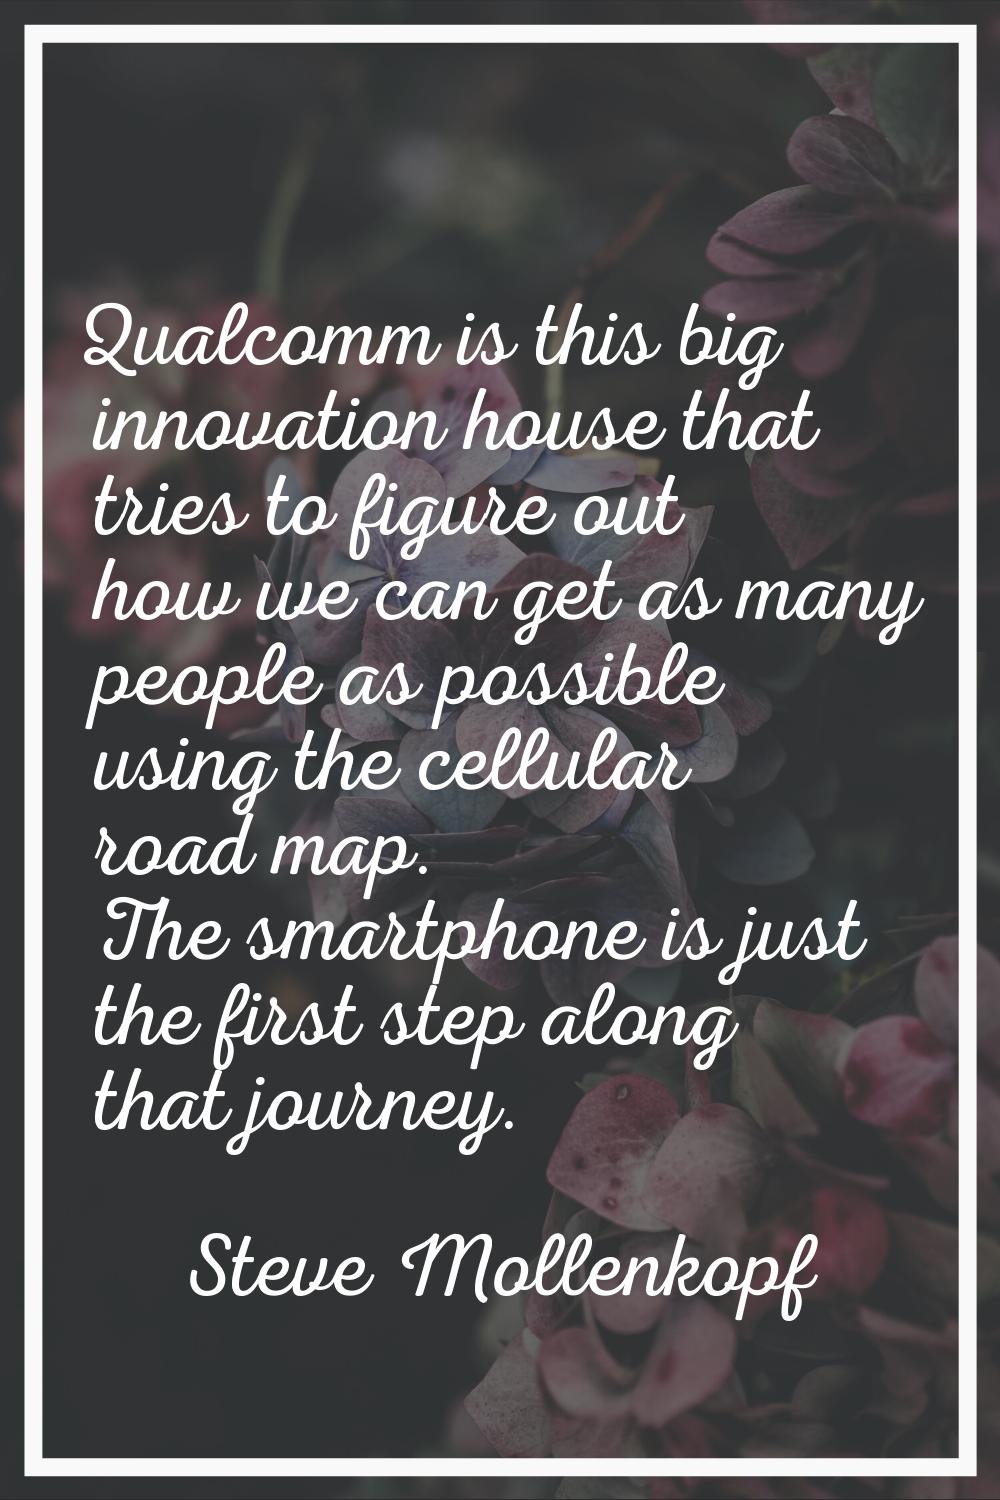 Qualcomm is this big innovation house that tries to figure out how we can get as many people as pos